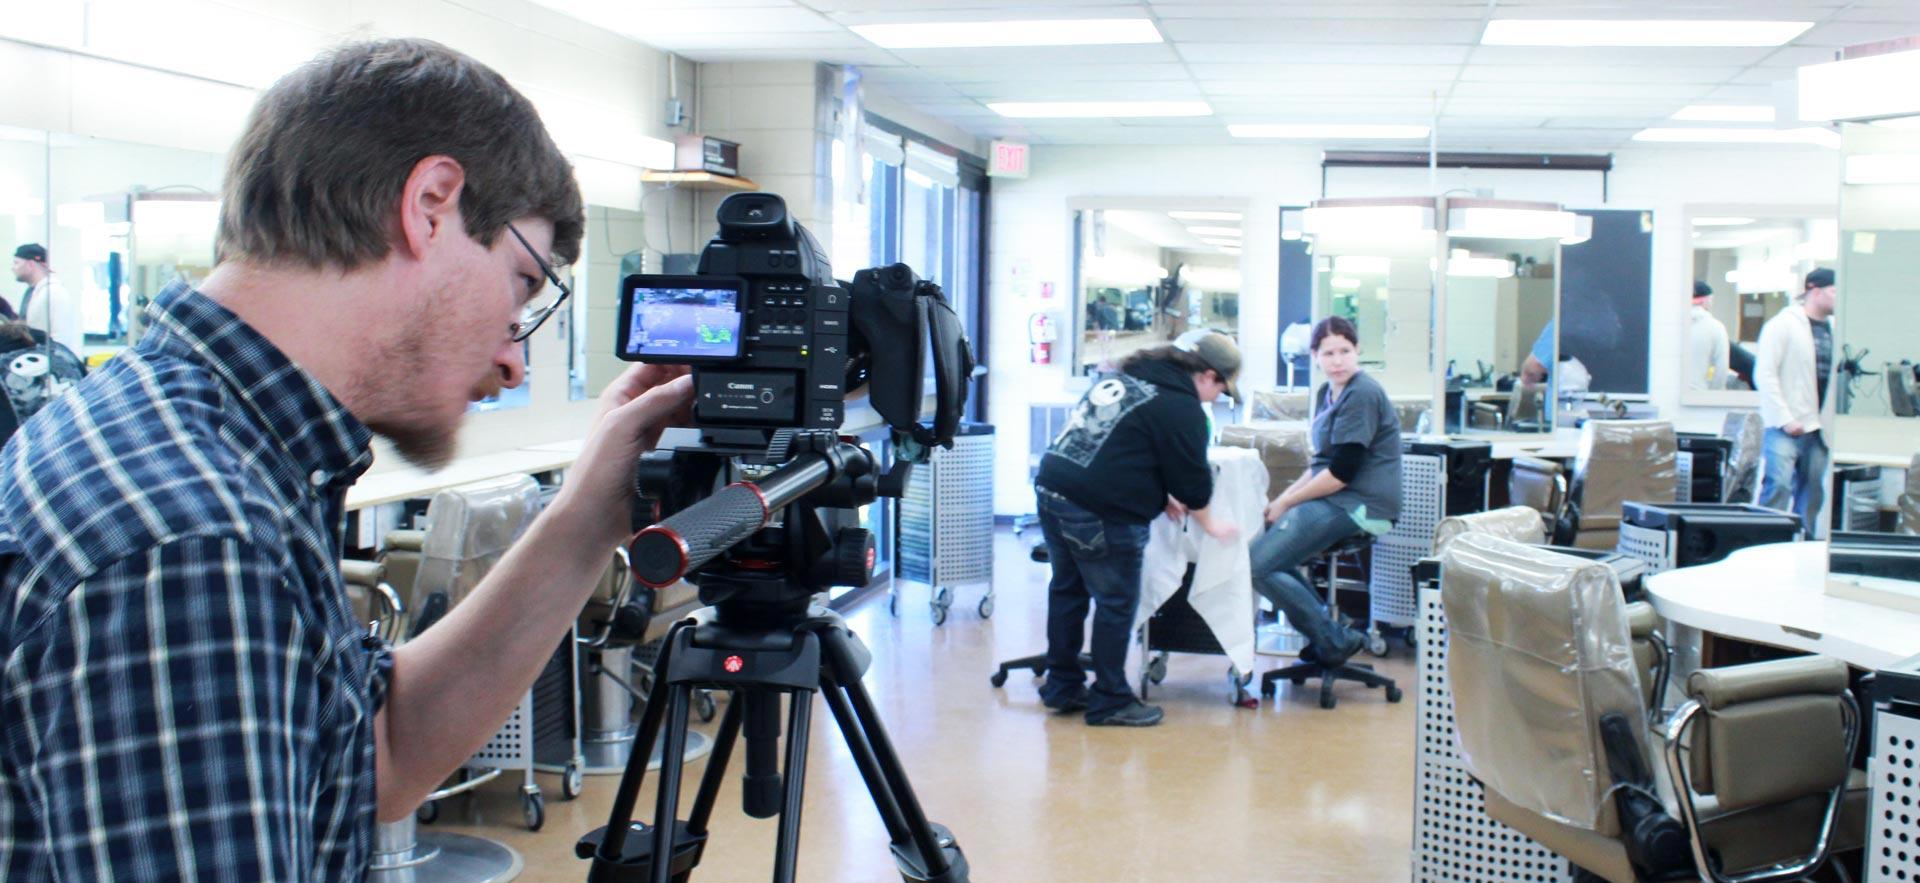 Male digital video student shoots video in the ӣƵ hairstyling salon.